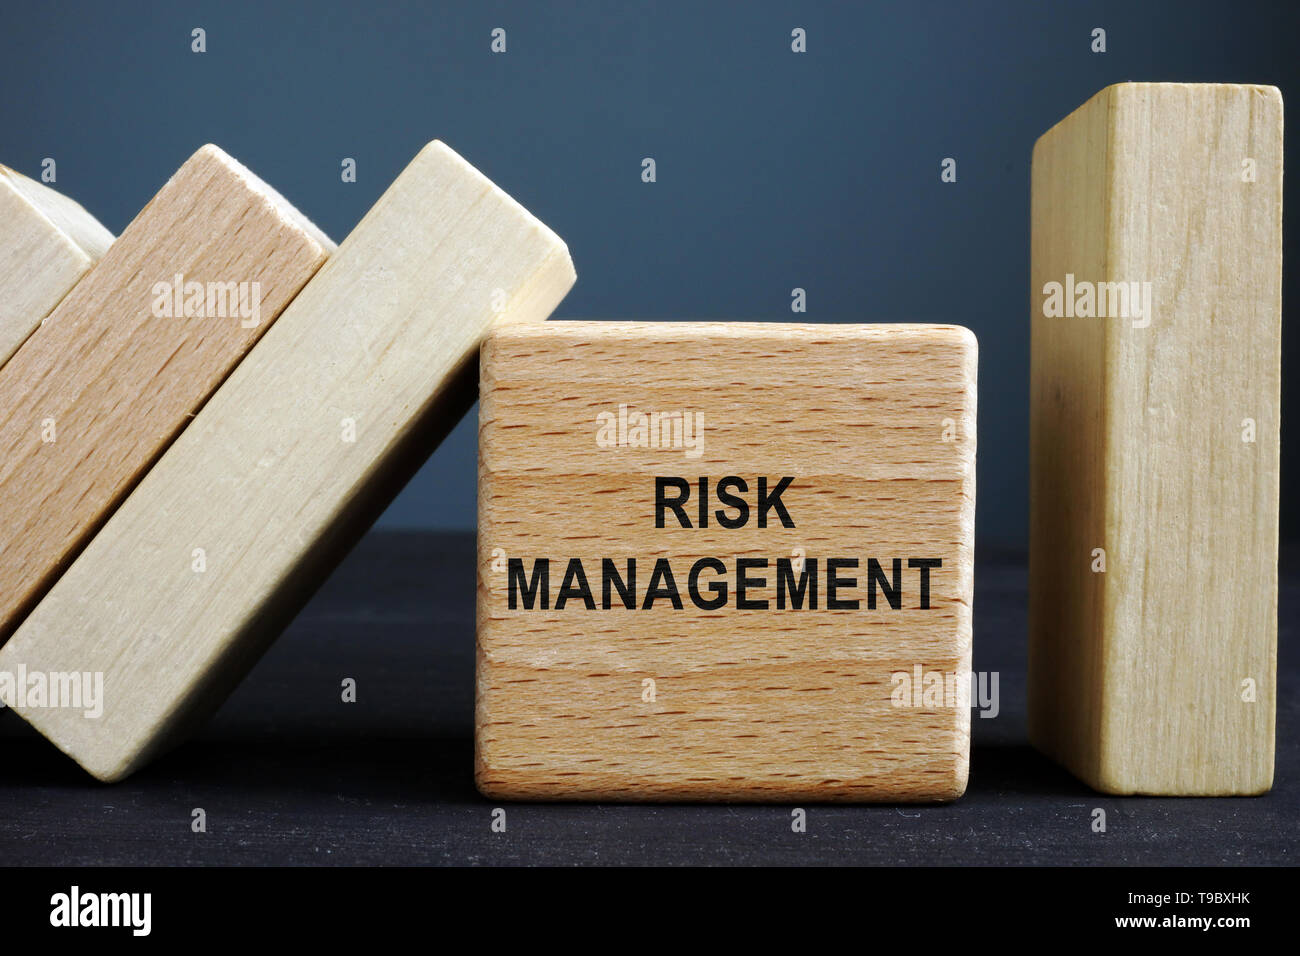 Risk management concept. Wooden cube and bricks with domino effect. Stock Photo